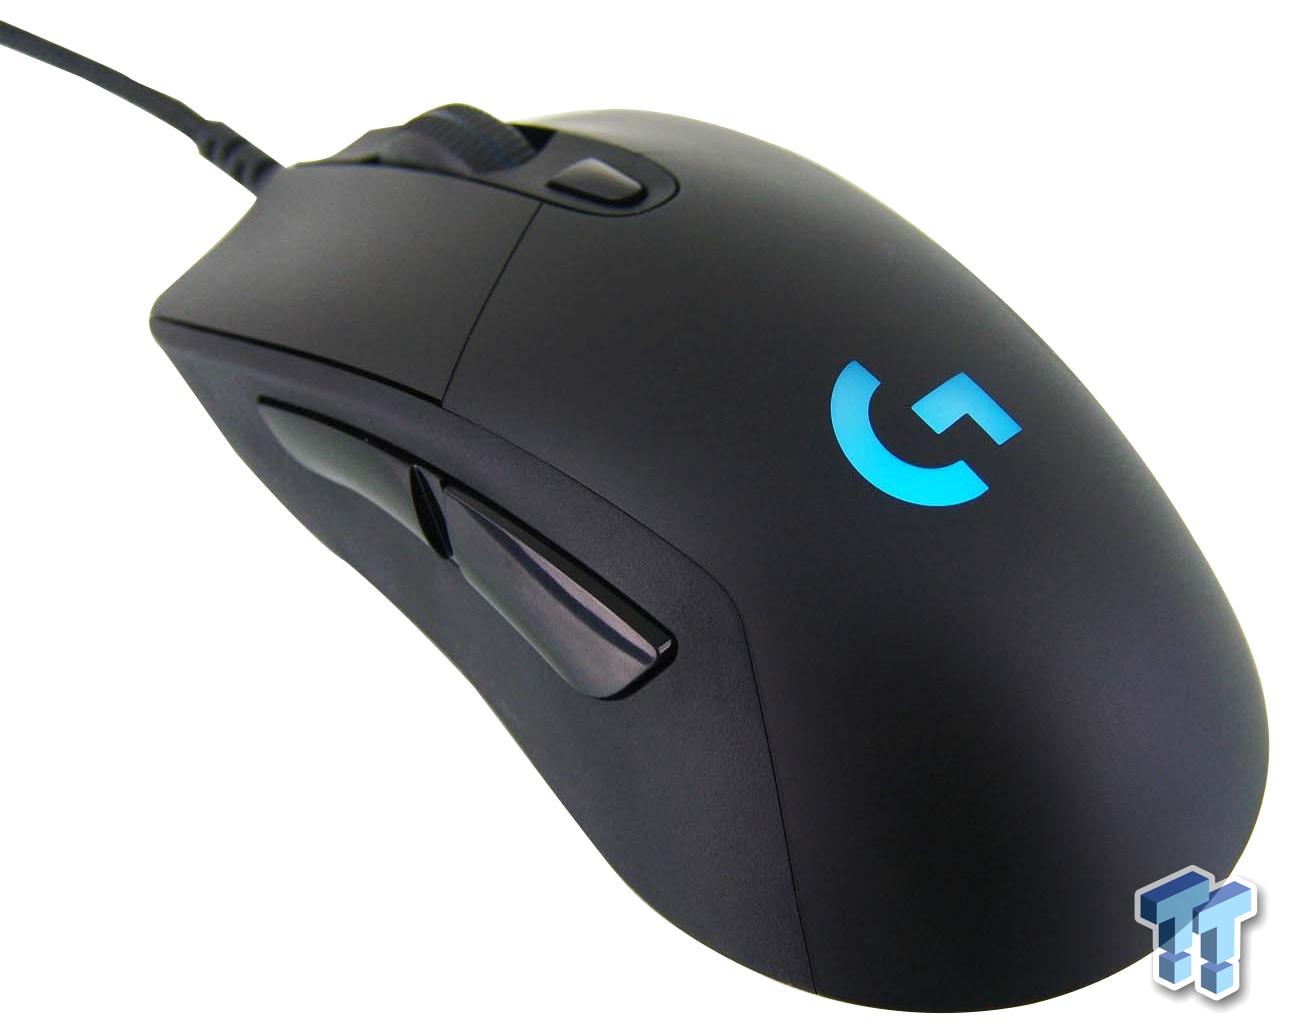 salon Opmuntring opføre sig Logitech G403 Prodigy Wireless/Wired Gaming Mouse Review